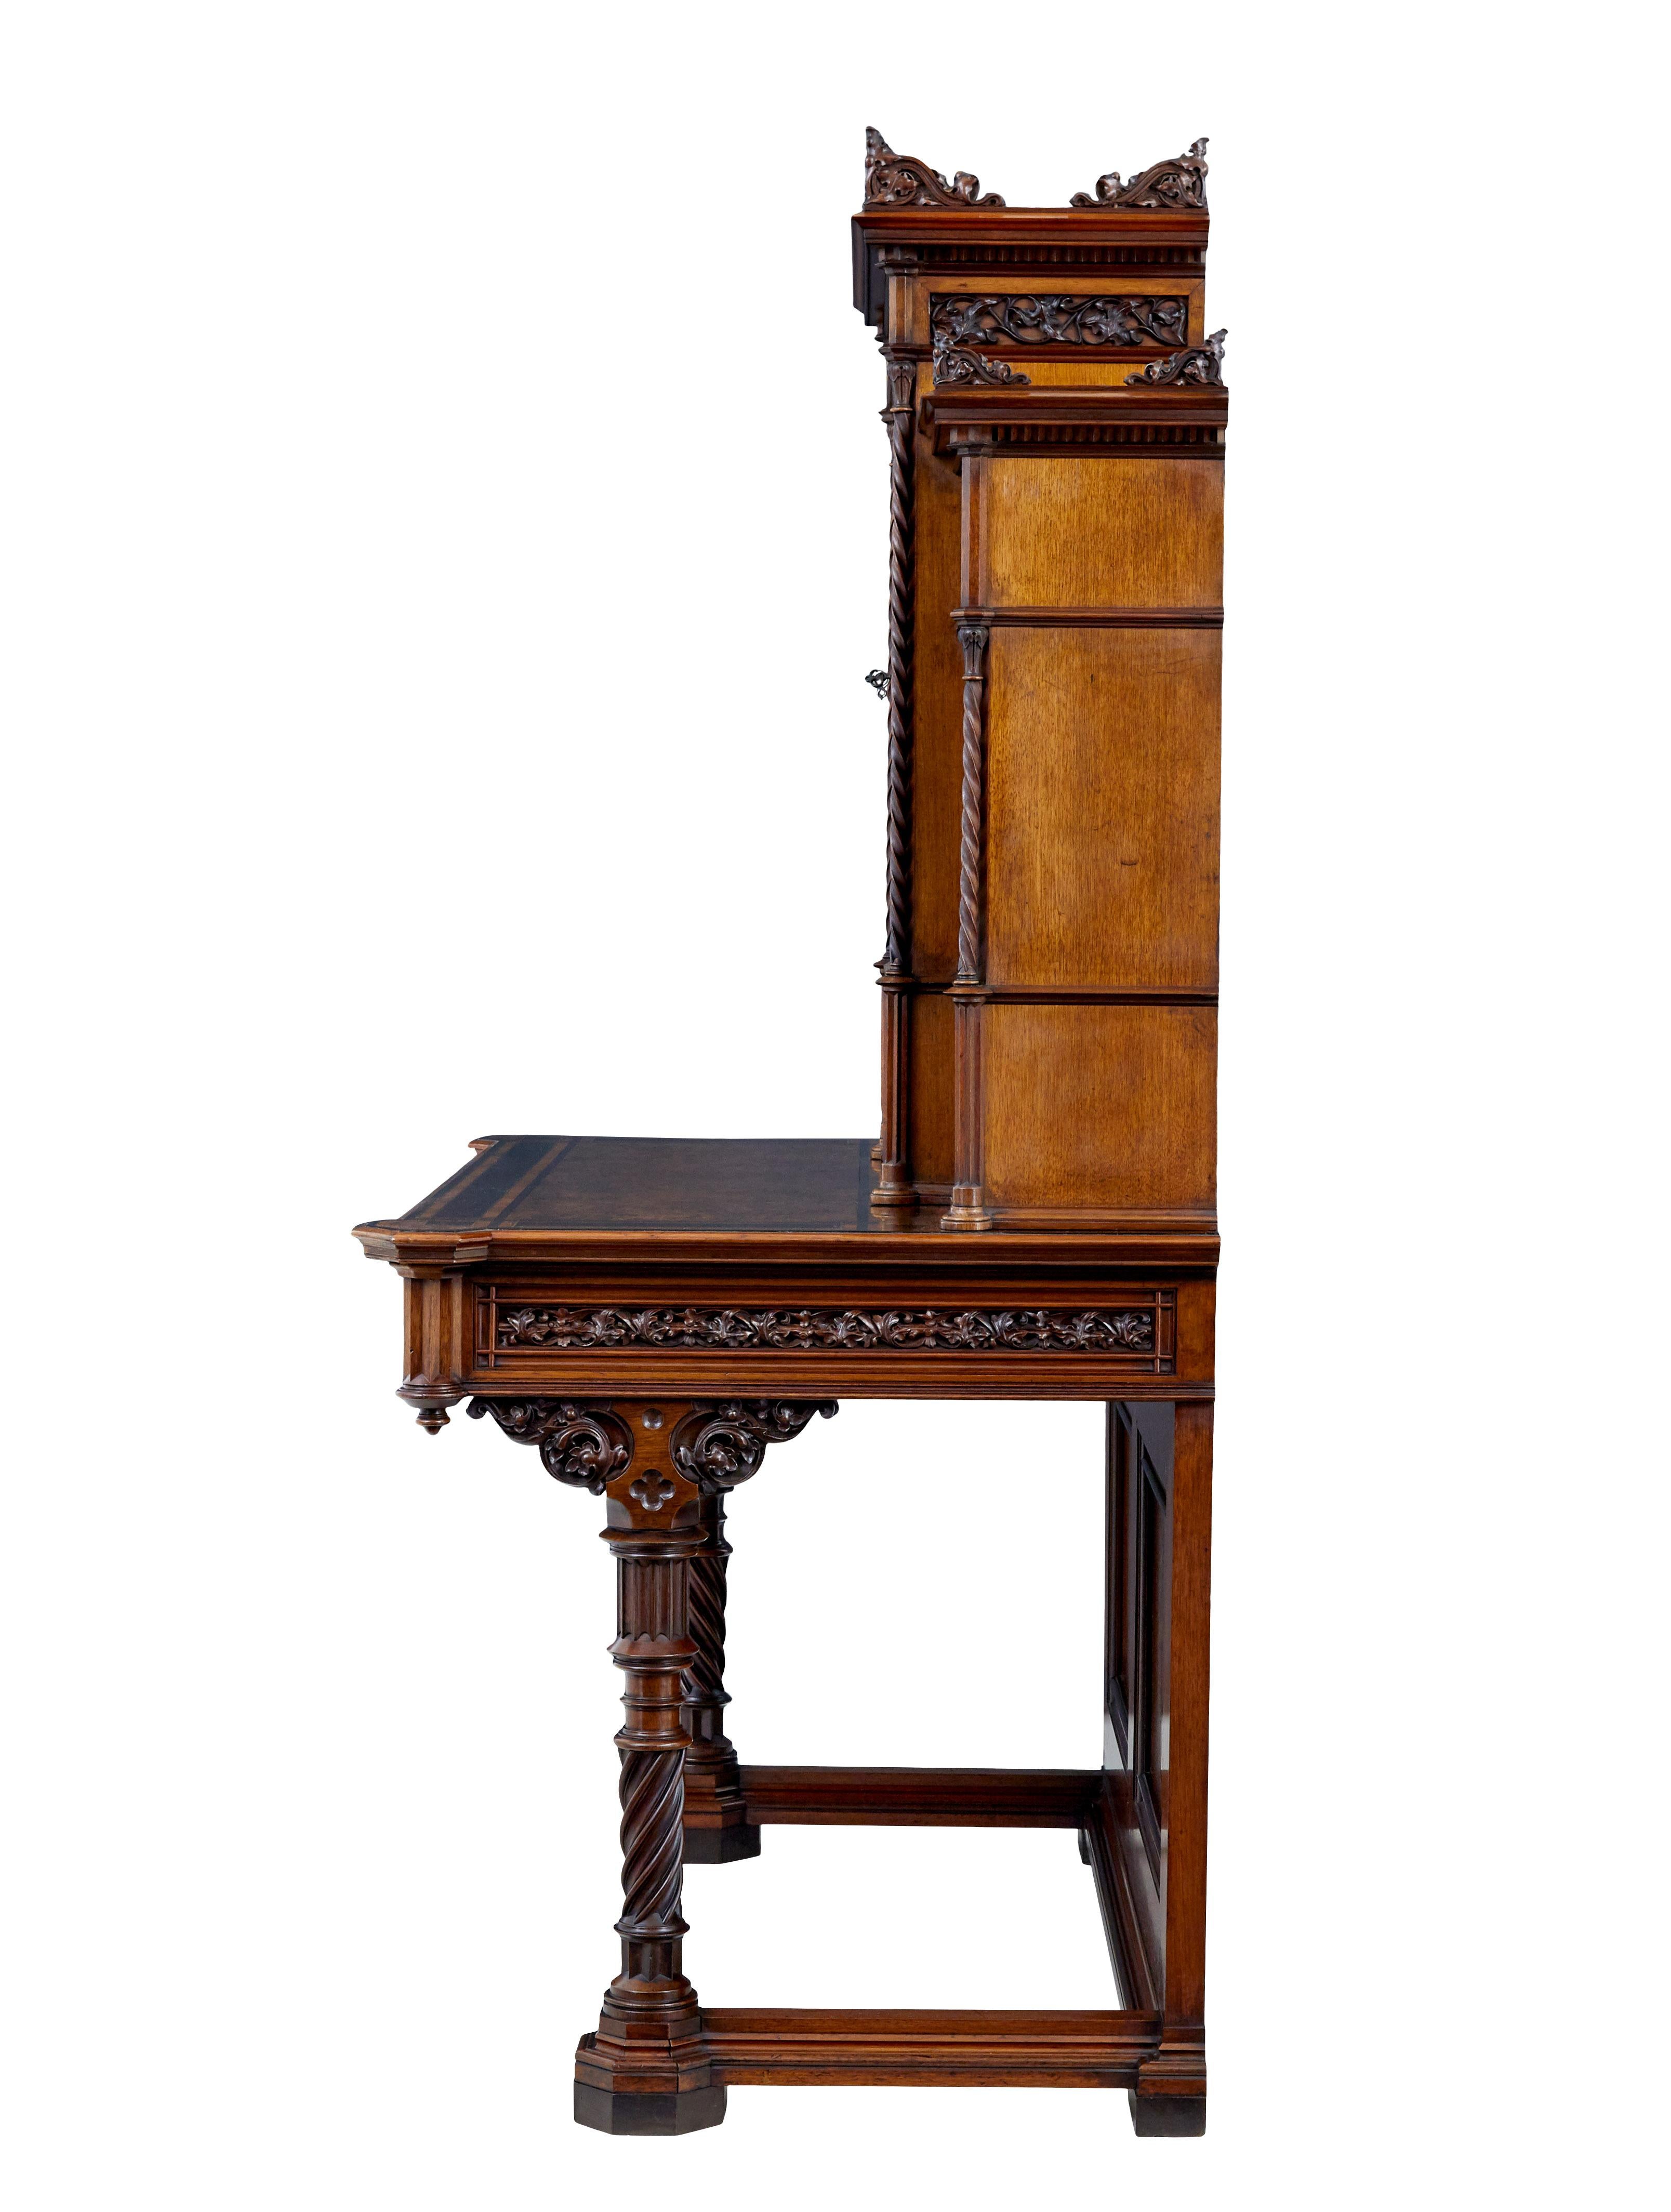 Brass Eclectic 19th century carved walnut desk and chair For Sale